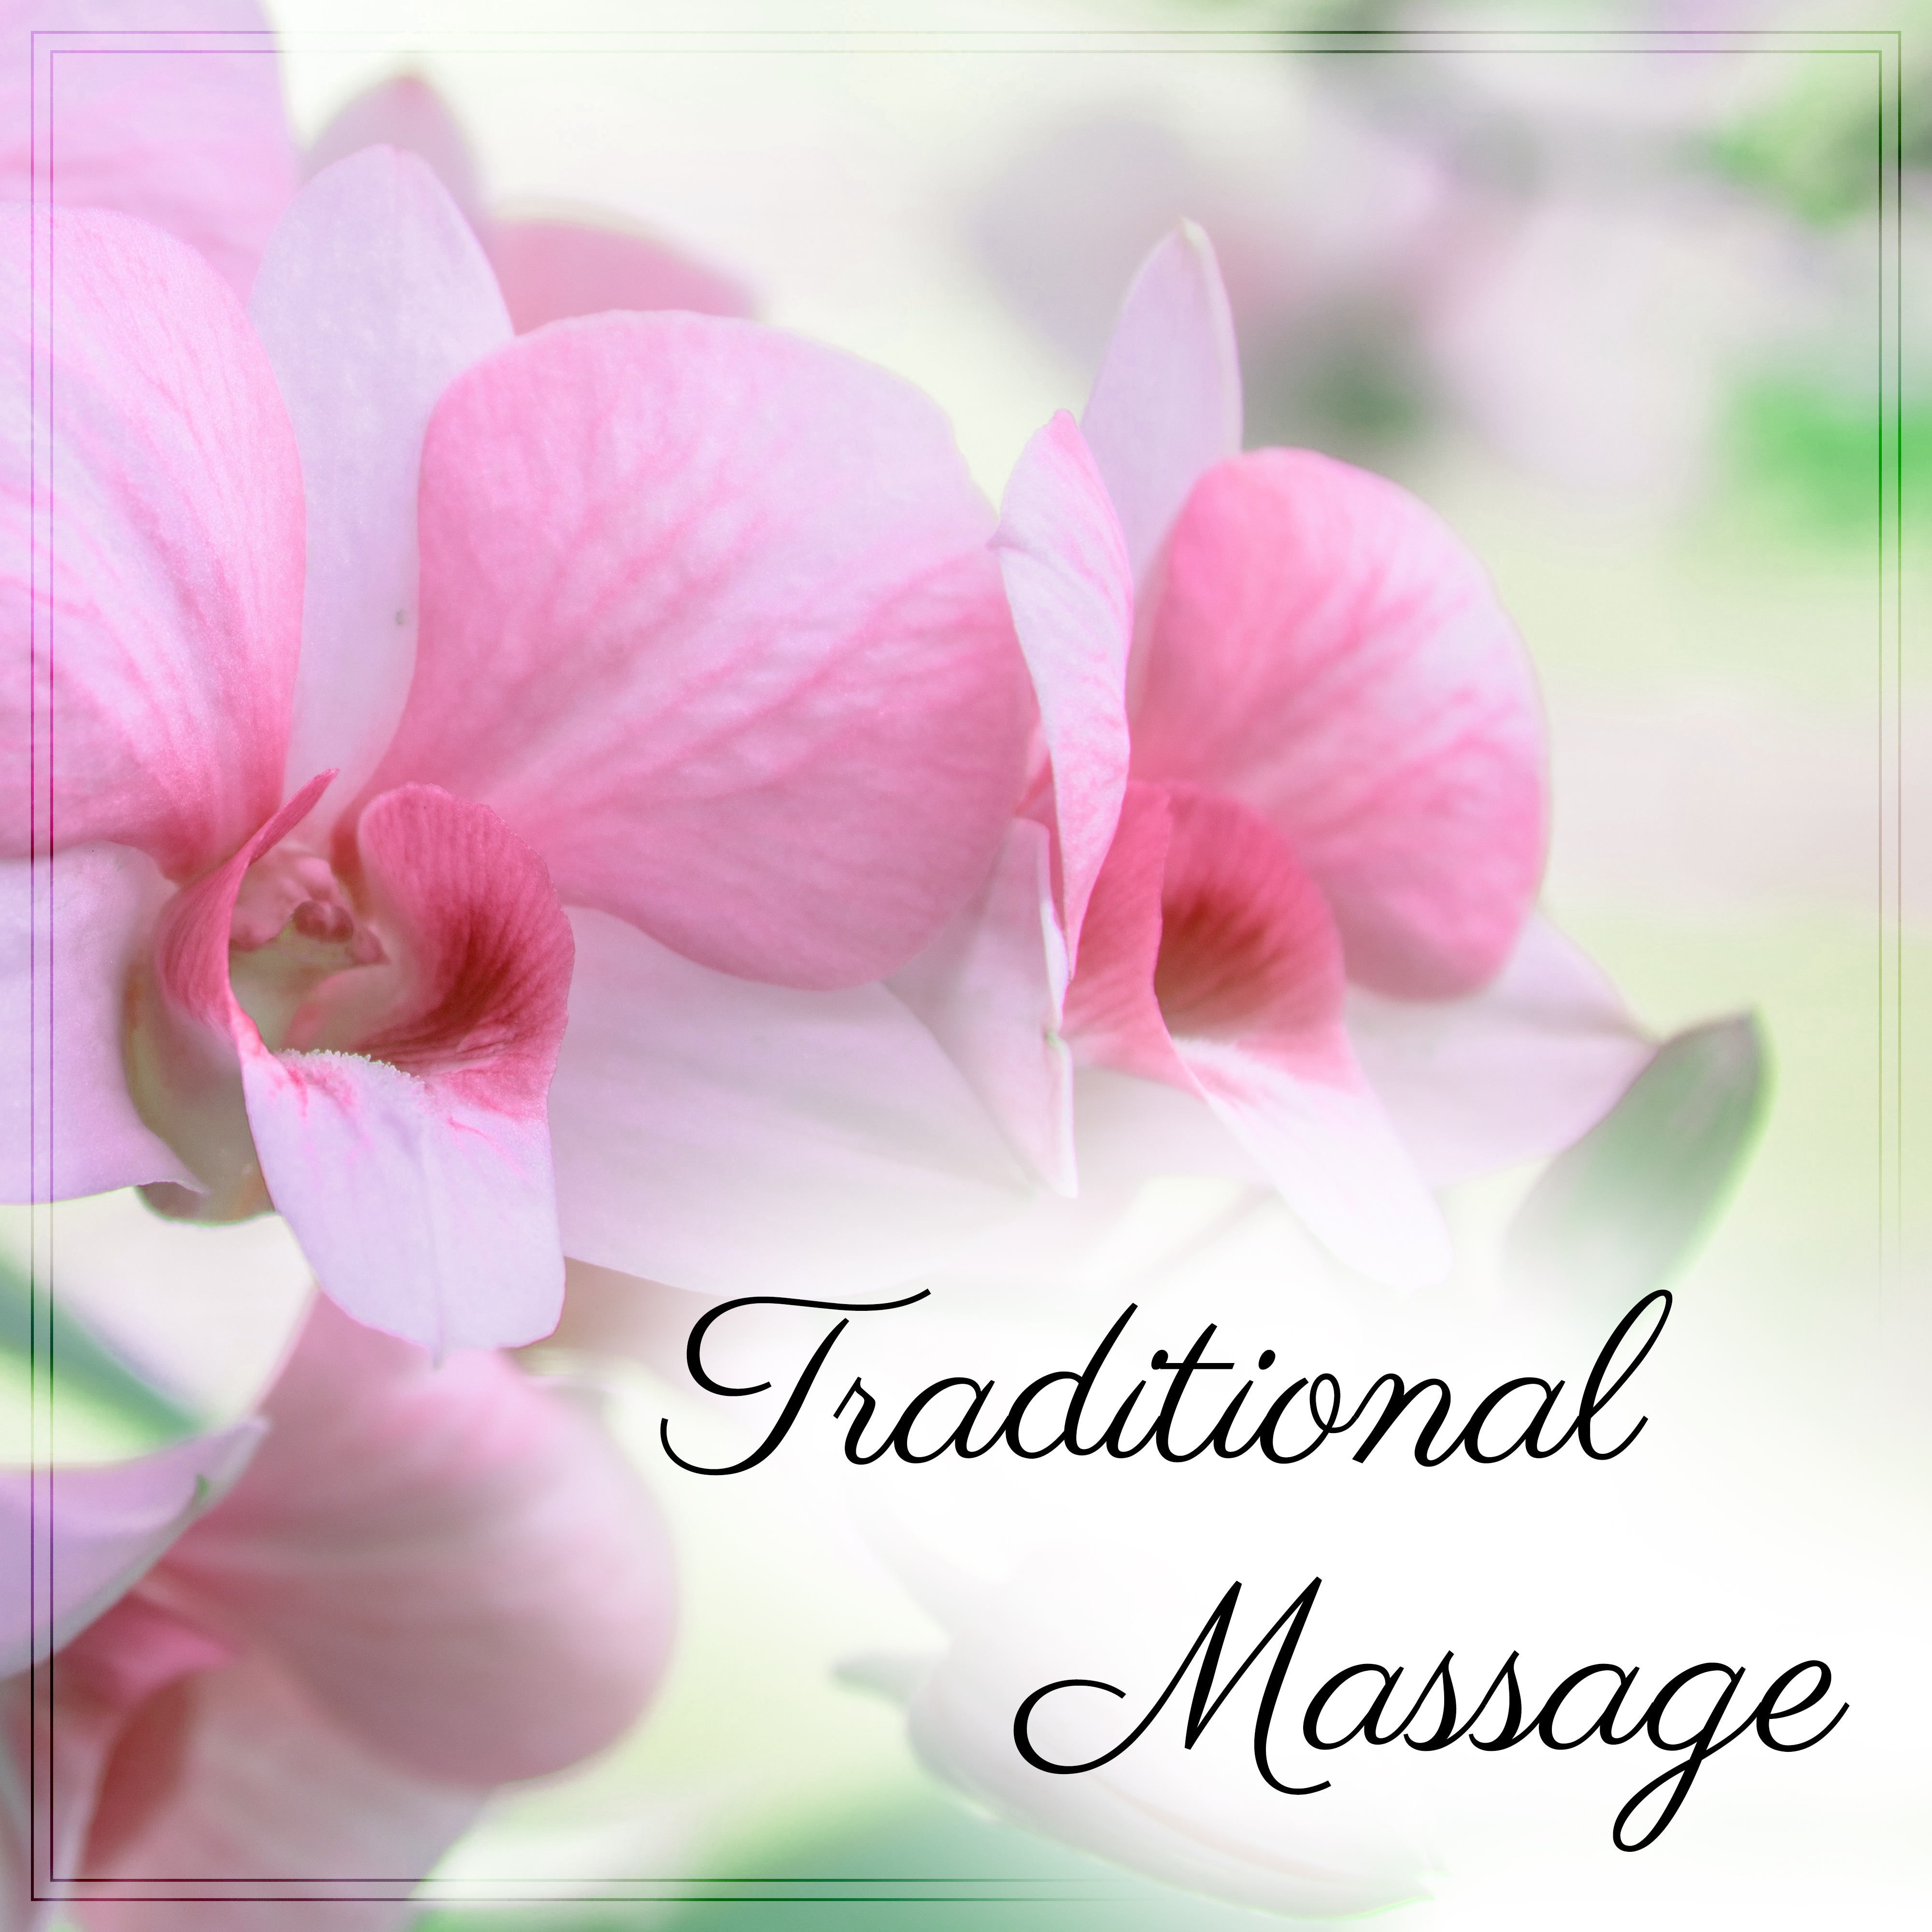 Traditional Massage – Spa Music, Wellness, Stress Free, Calming Sounds for Relaxation, Pure Mind, Asian Spa, Sounds of Water